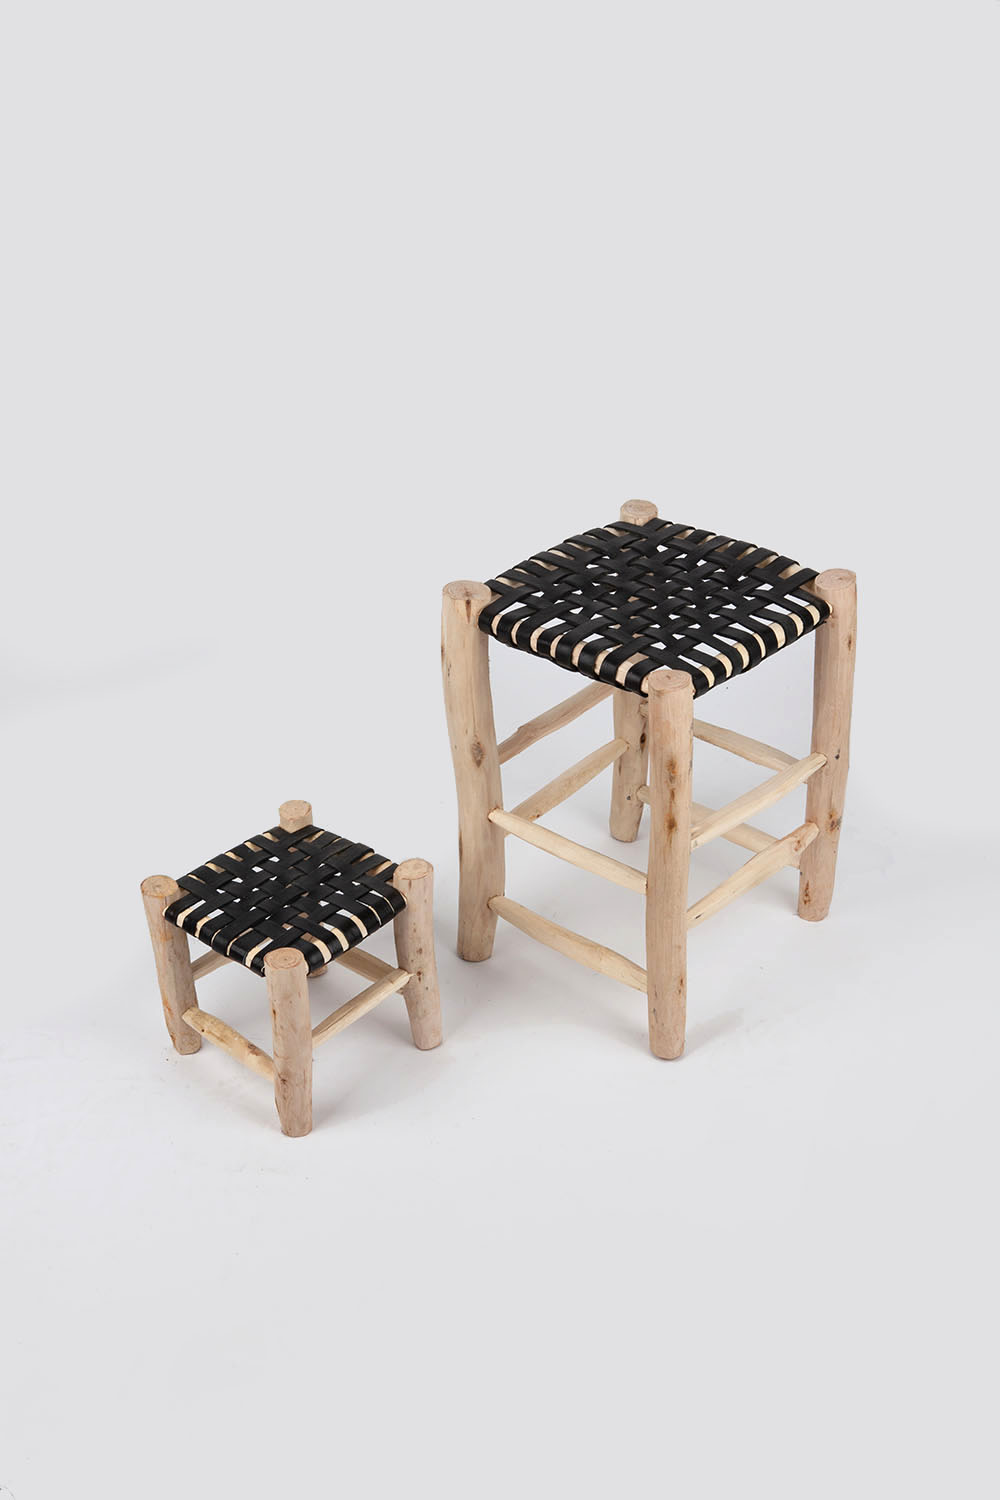 leather stool - L BN